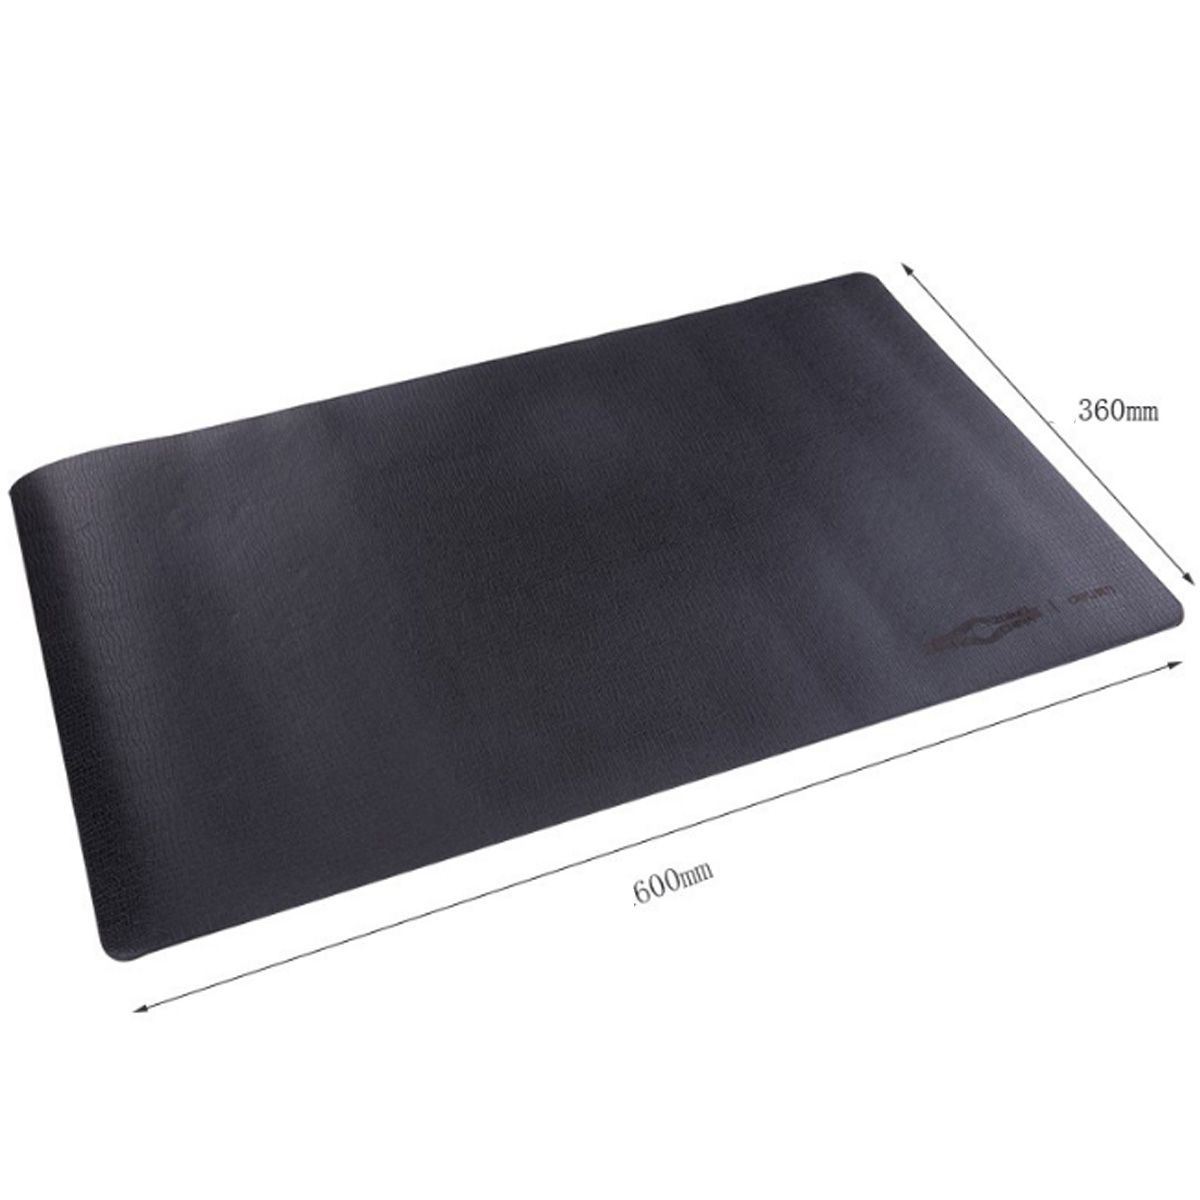 Deli-G20-Large-Size-Mouse-Pad-Multifunctional-Waterproof-Thicken-Keyboard-Pad-Mouse-Mat-1634354